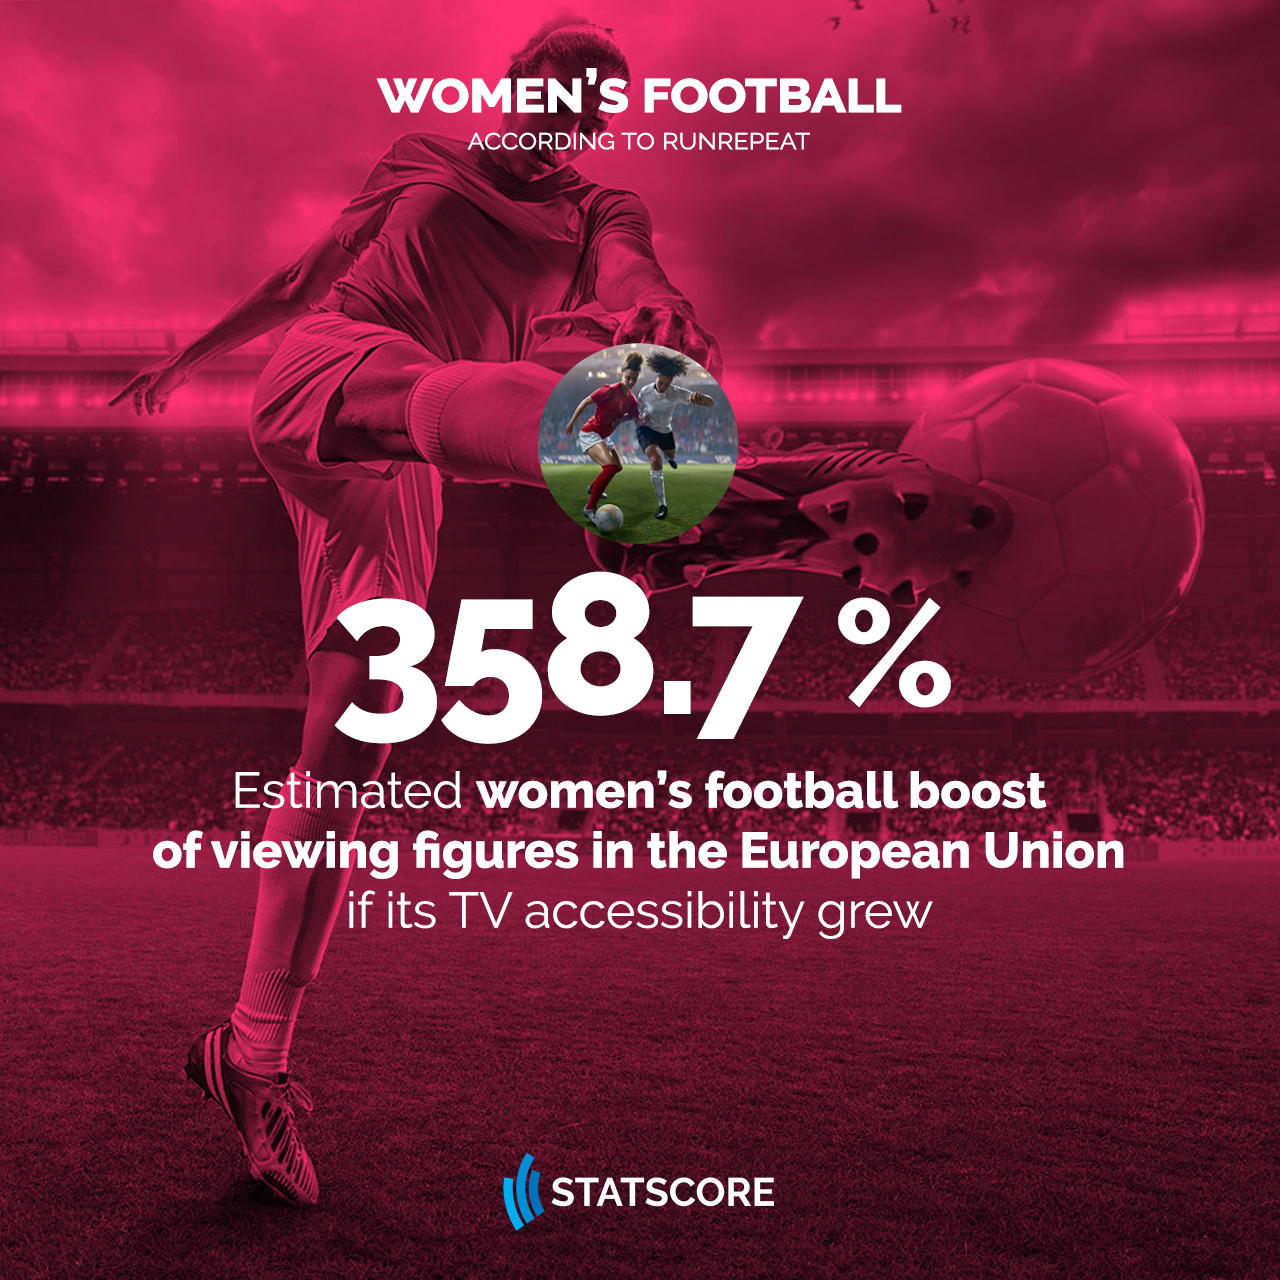 Women's football is on the rise. What are its main drivers and challenges? - STATSCORE - News Center